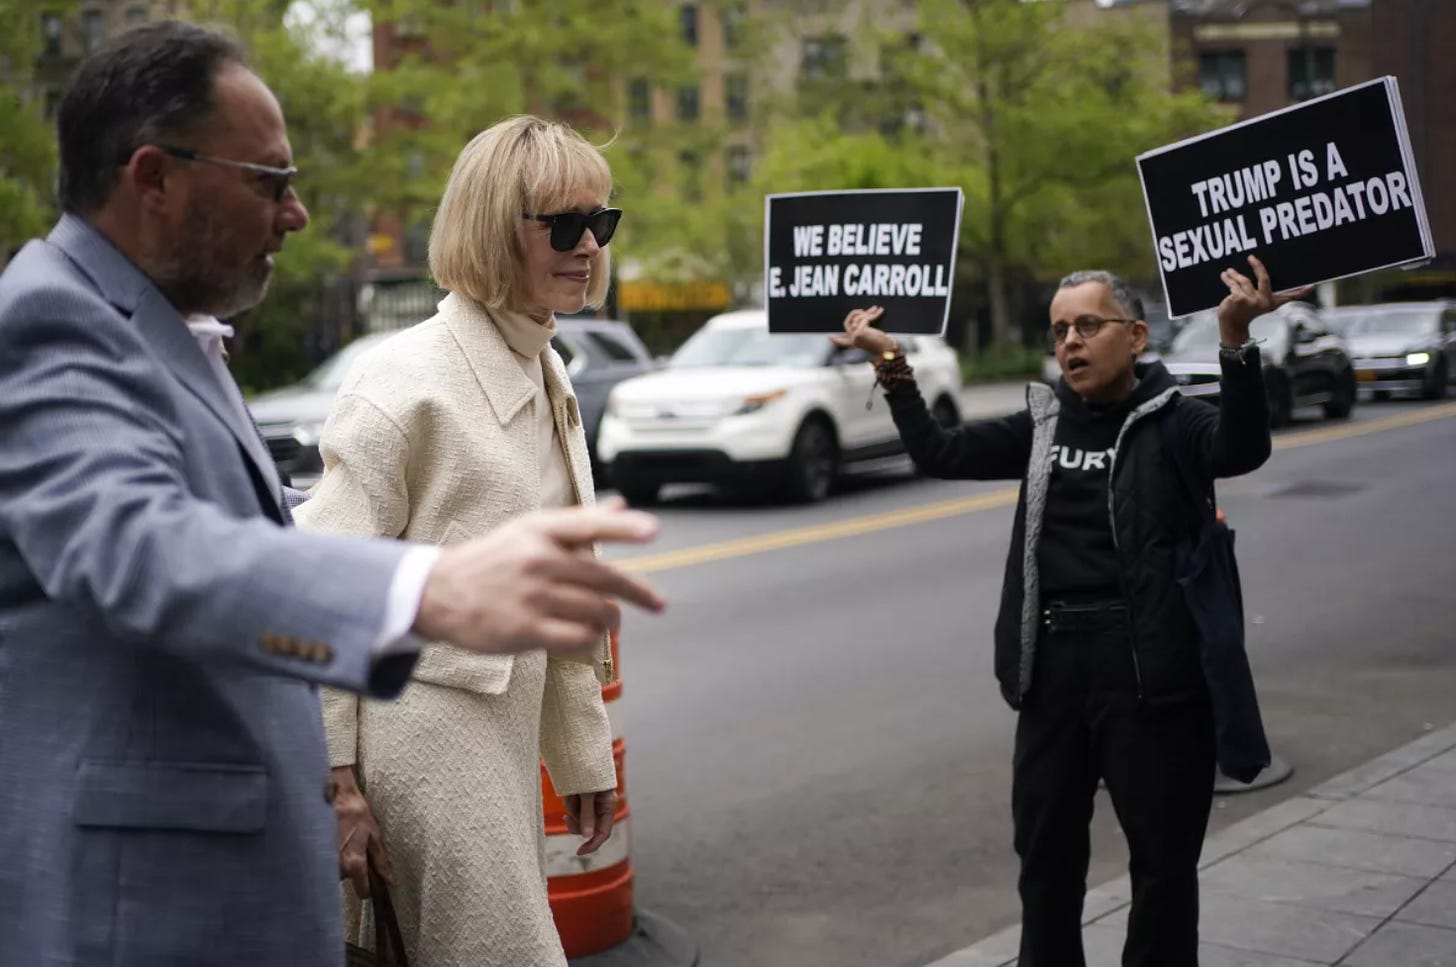 E. Jean Carroll walking into court. Behind her is a person holding up one sign that says "We believe E. Jean Carroll" and another sign that says "Trump is a sexual predator."